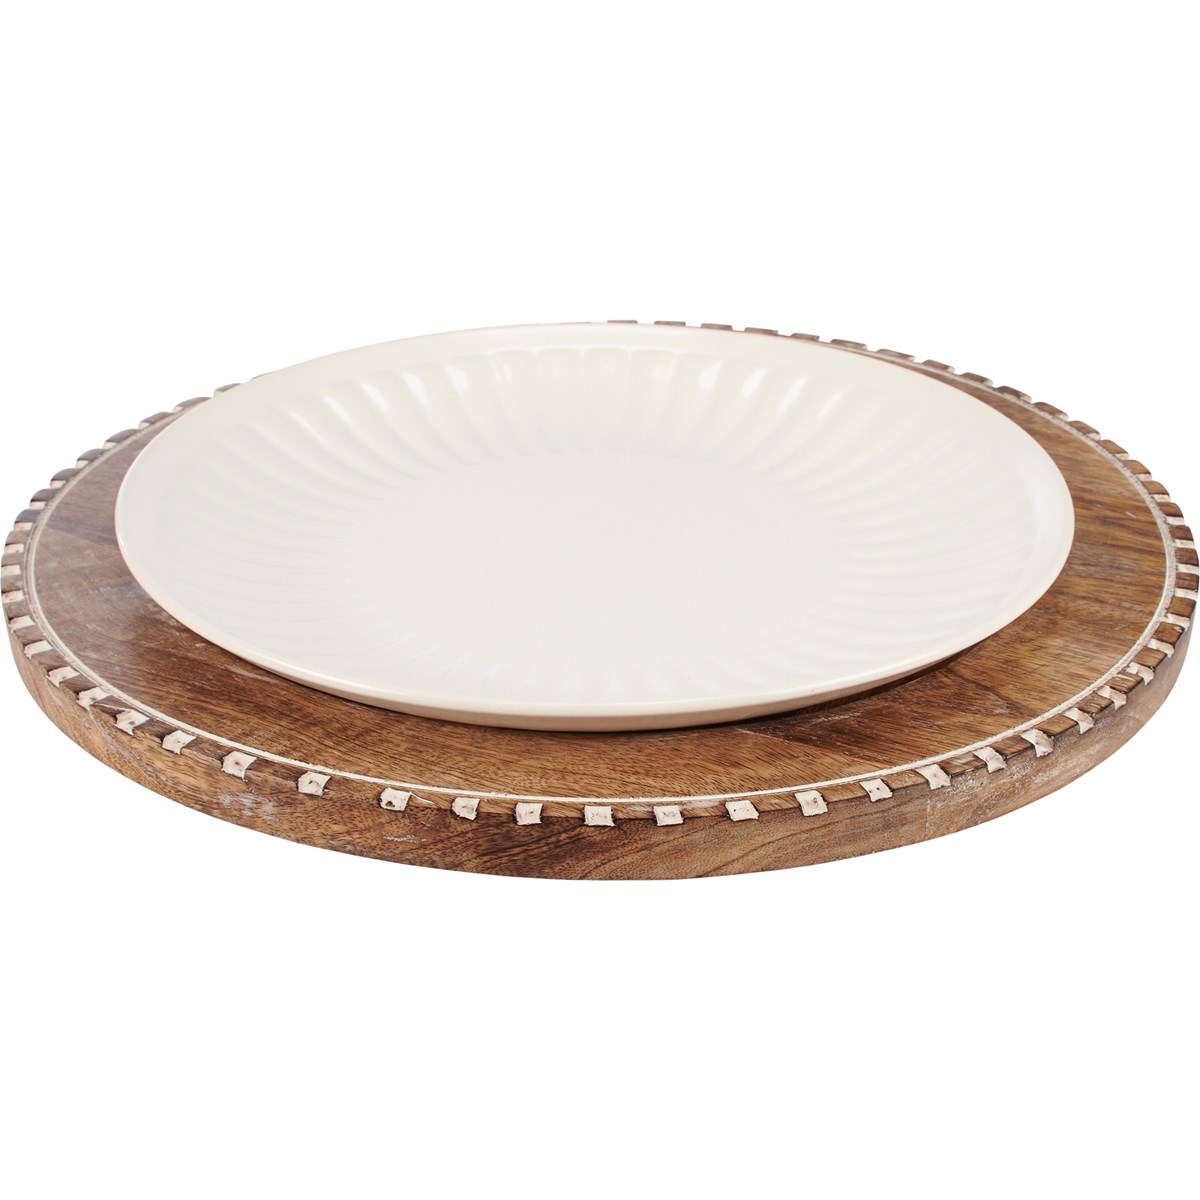 Large Wood Charger Plate - Wood